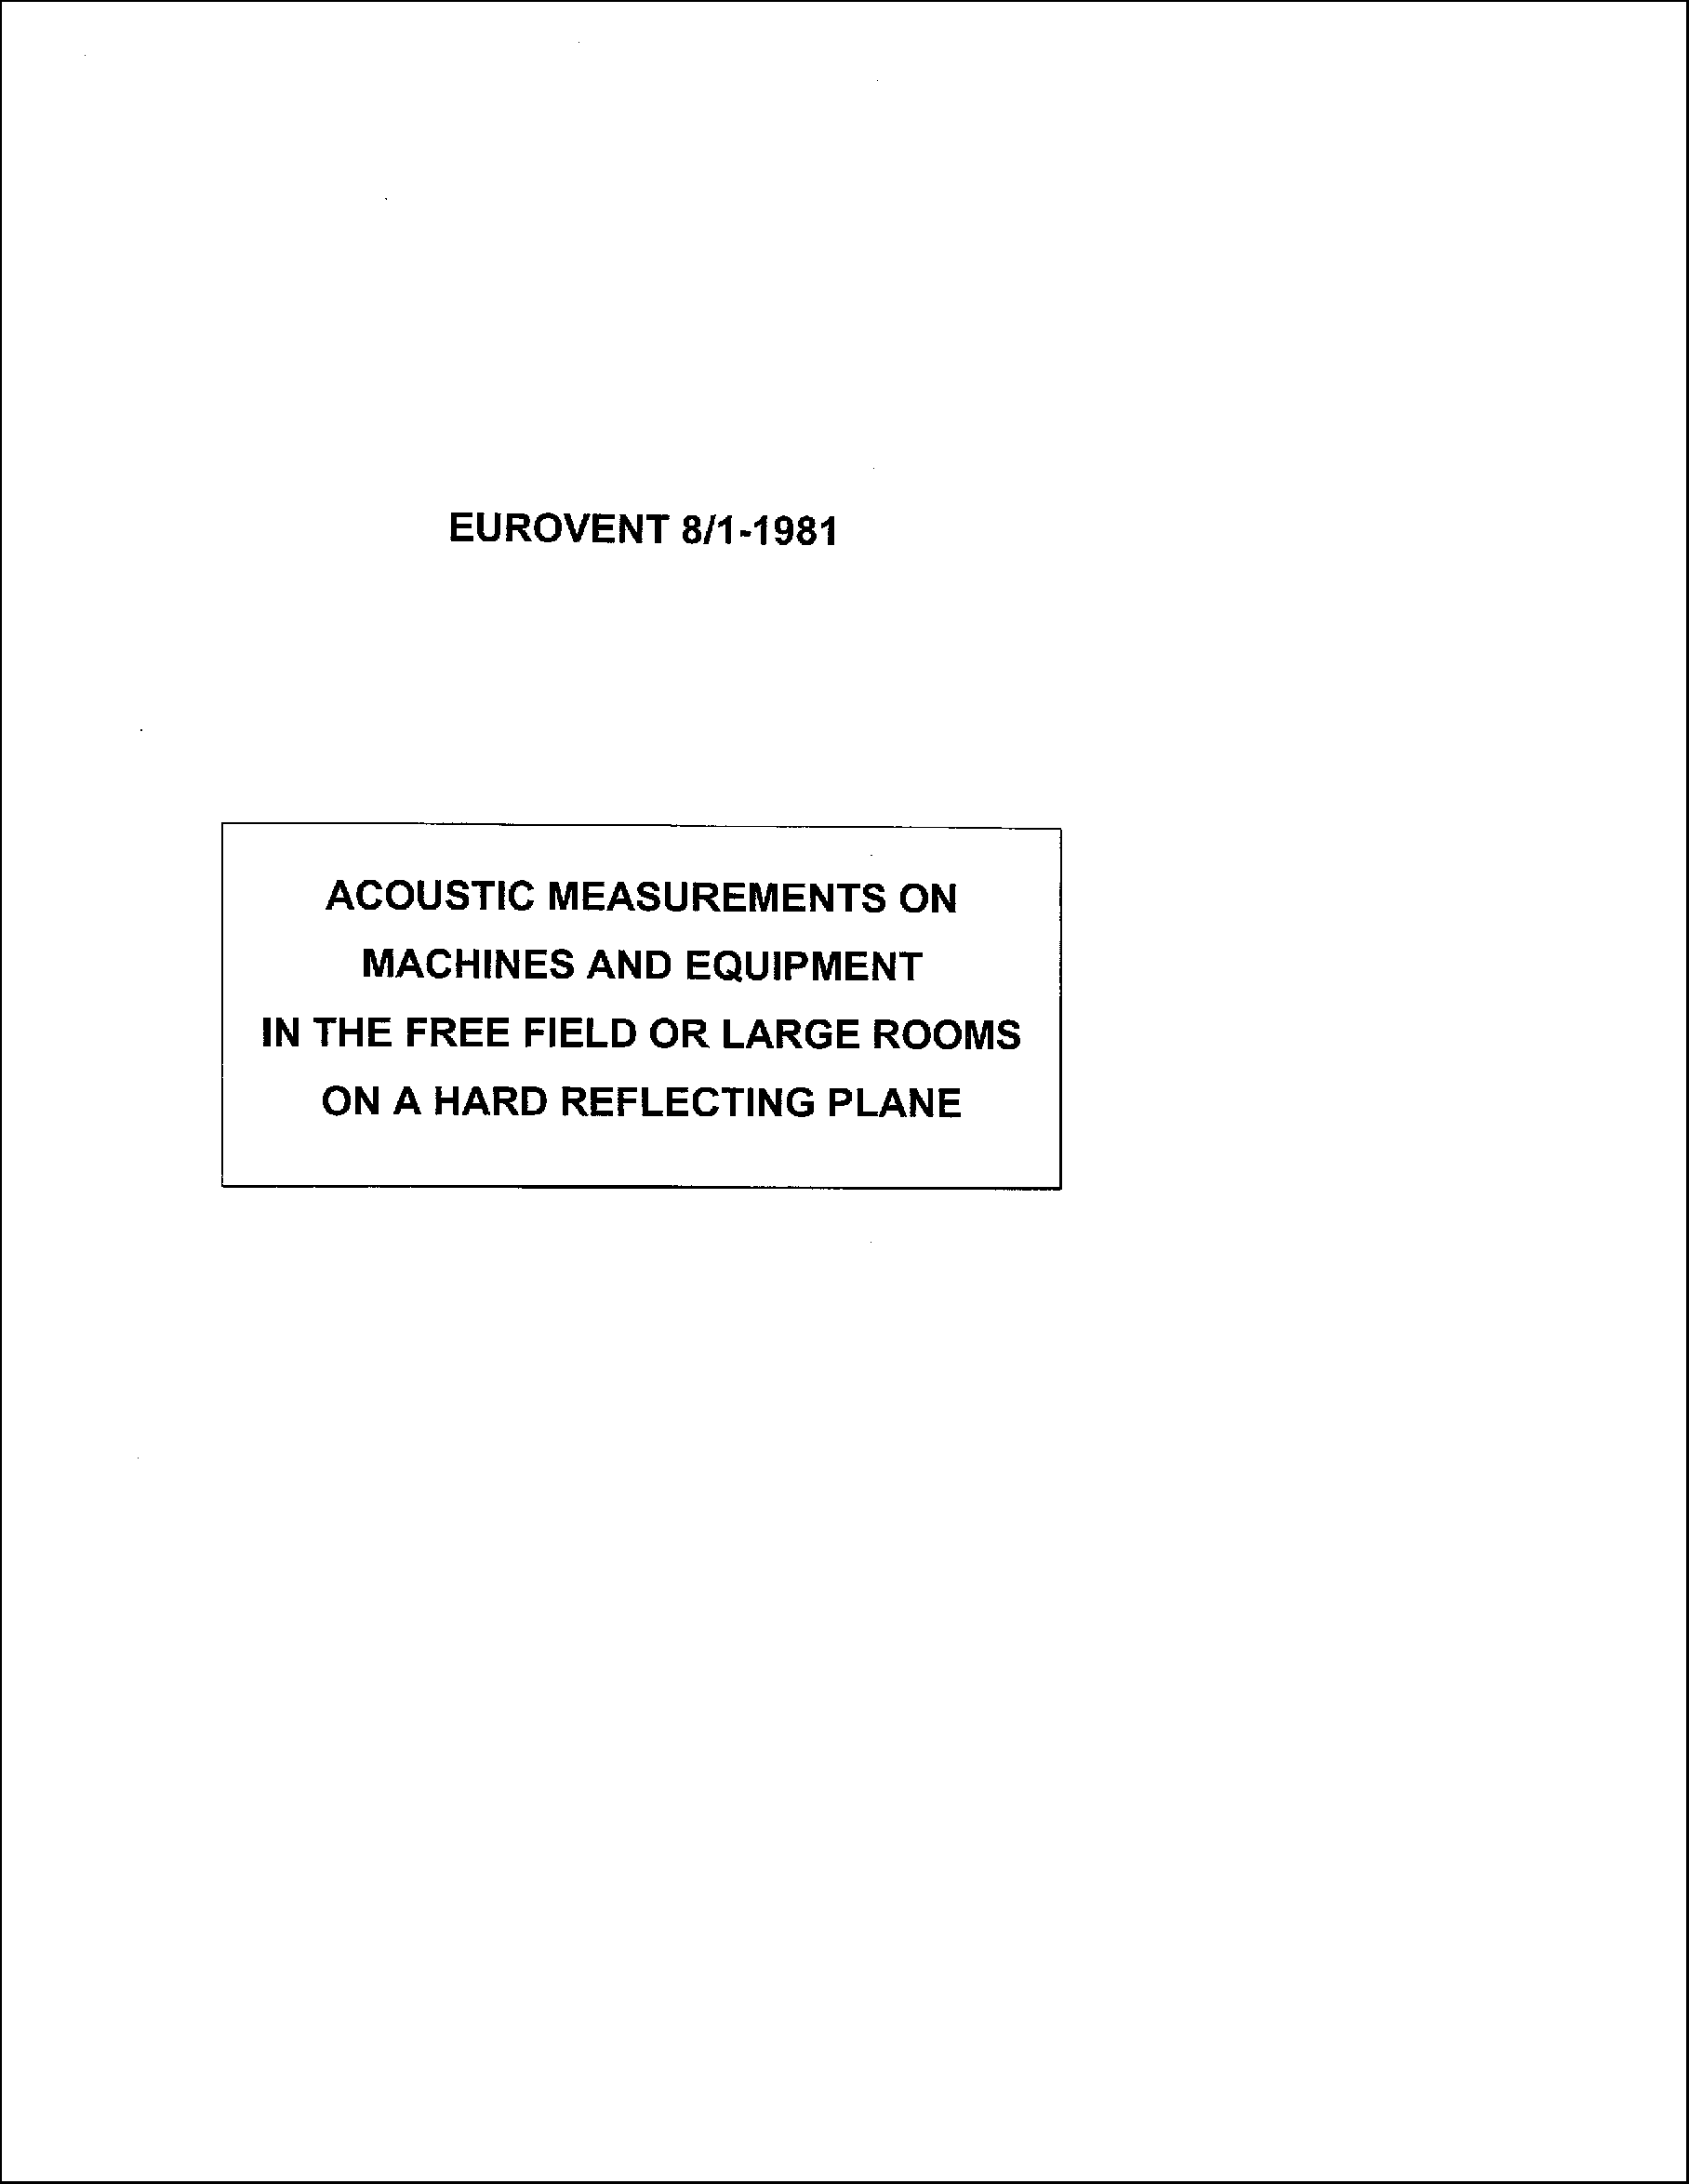 1981 - Acoustic measurements on machines and equipment